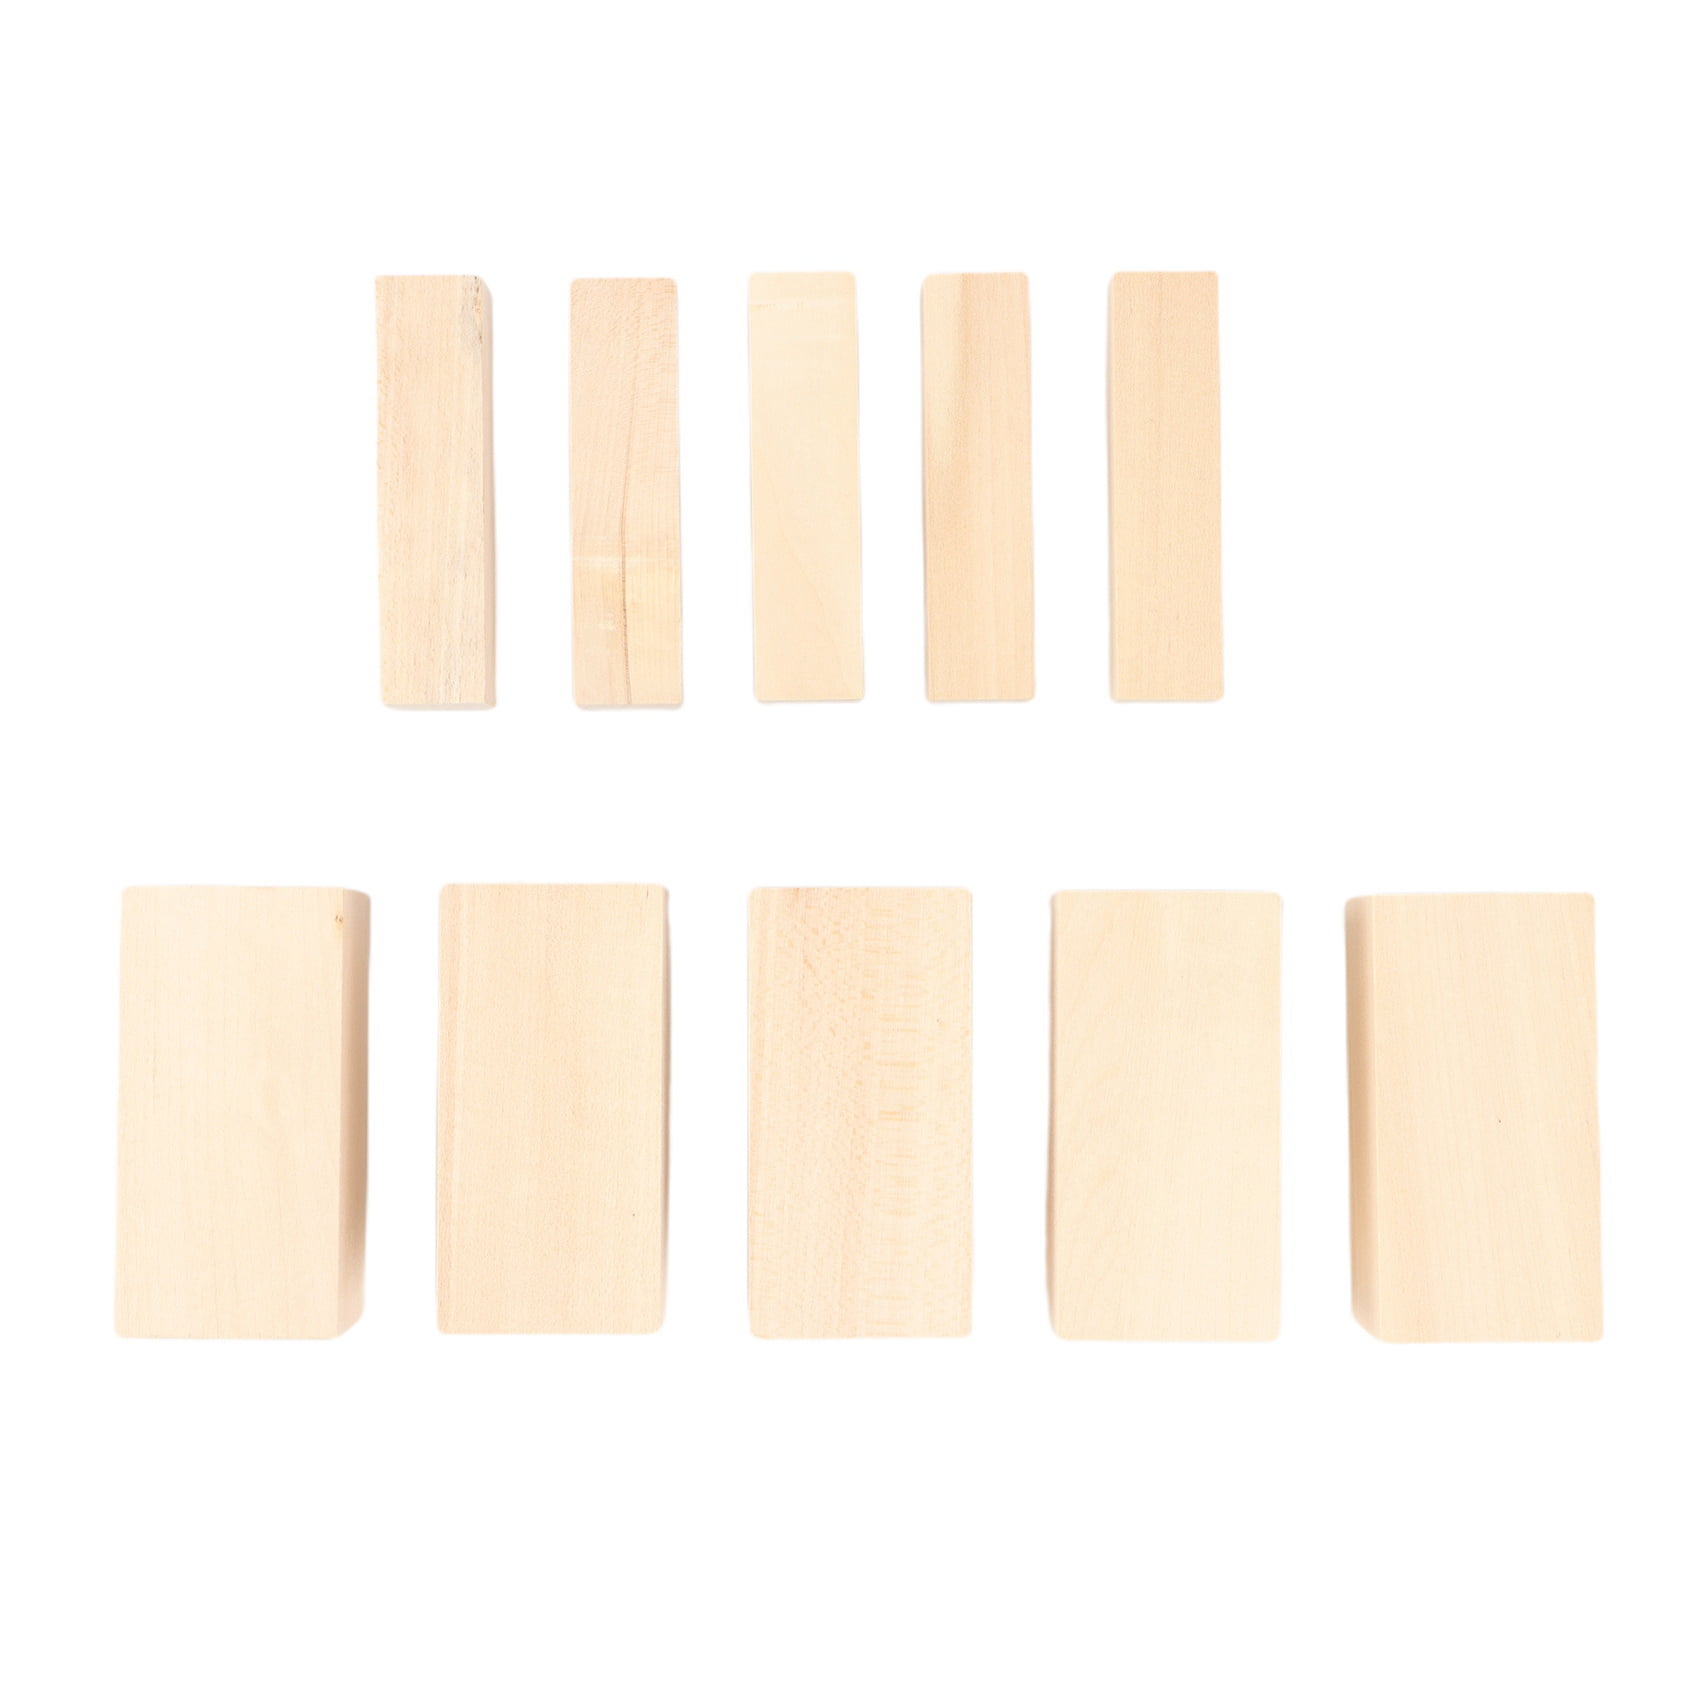 10 Pieces Basswood Carving Blocks Soft Wood Carving Block Hobby